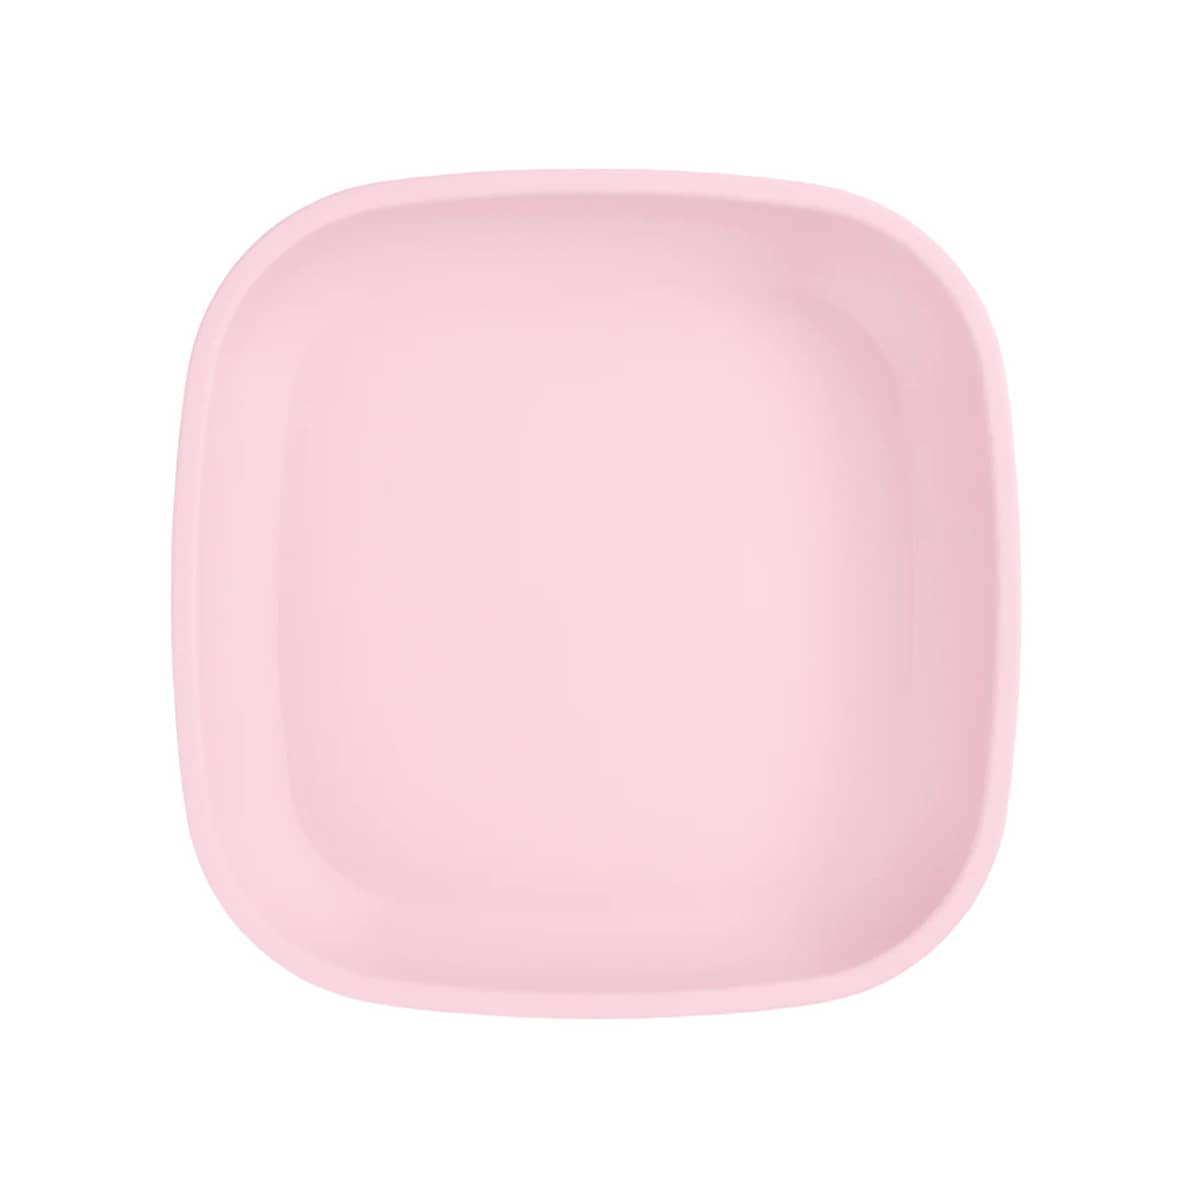 Re-Play Recycled Flat Plate - Naturals Collection - Ice Pink